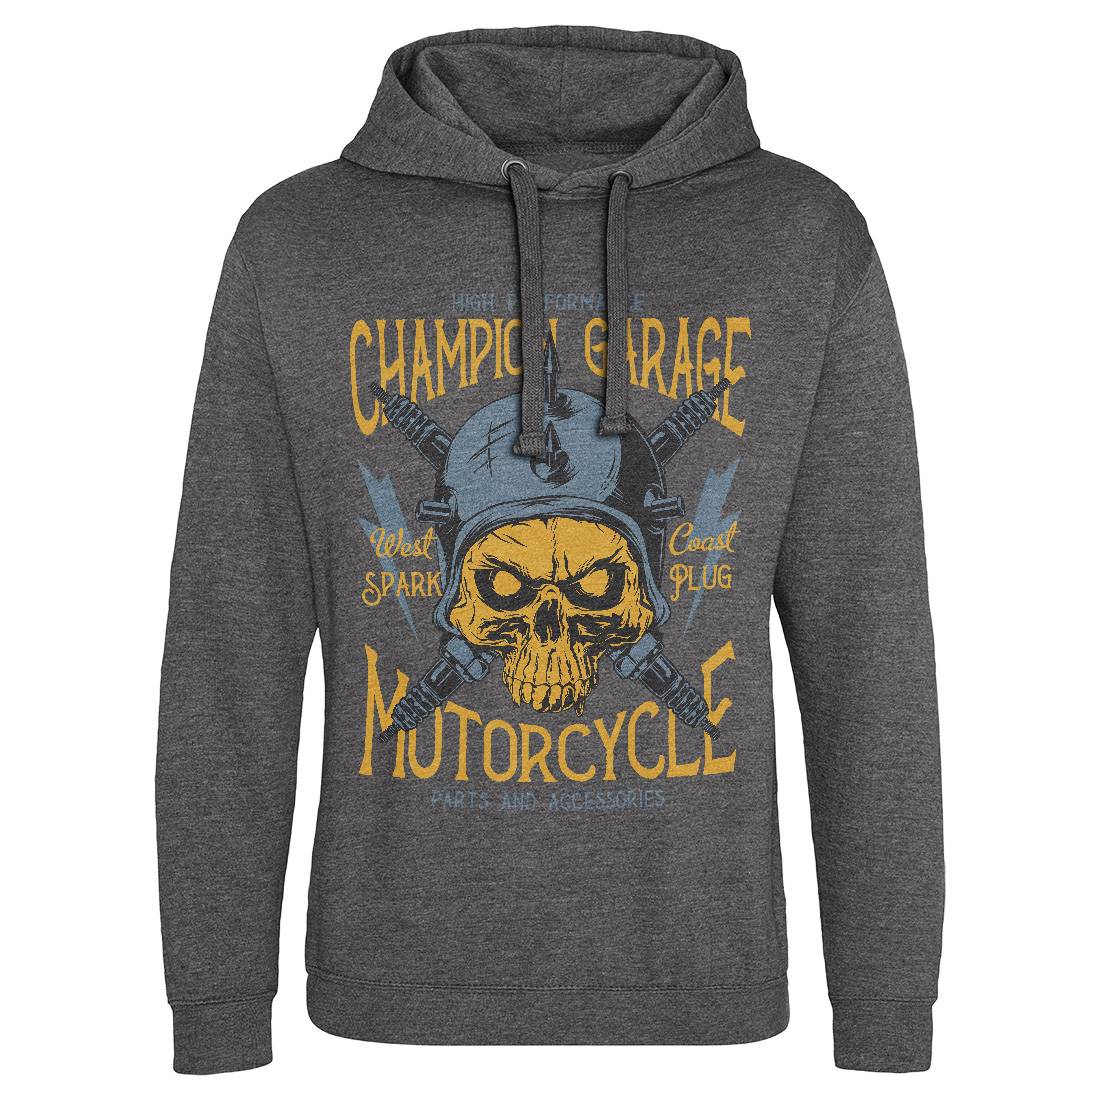 Champion Garage Mens Hoodie Without Pocket Motorcycles D917